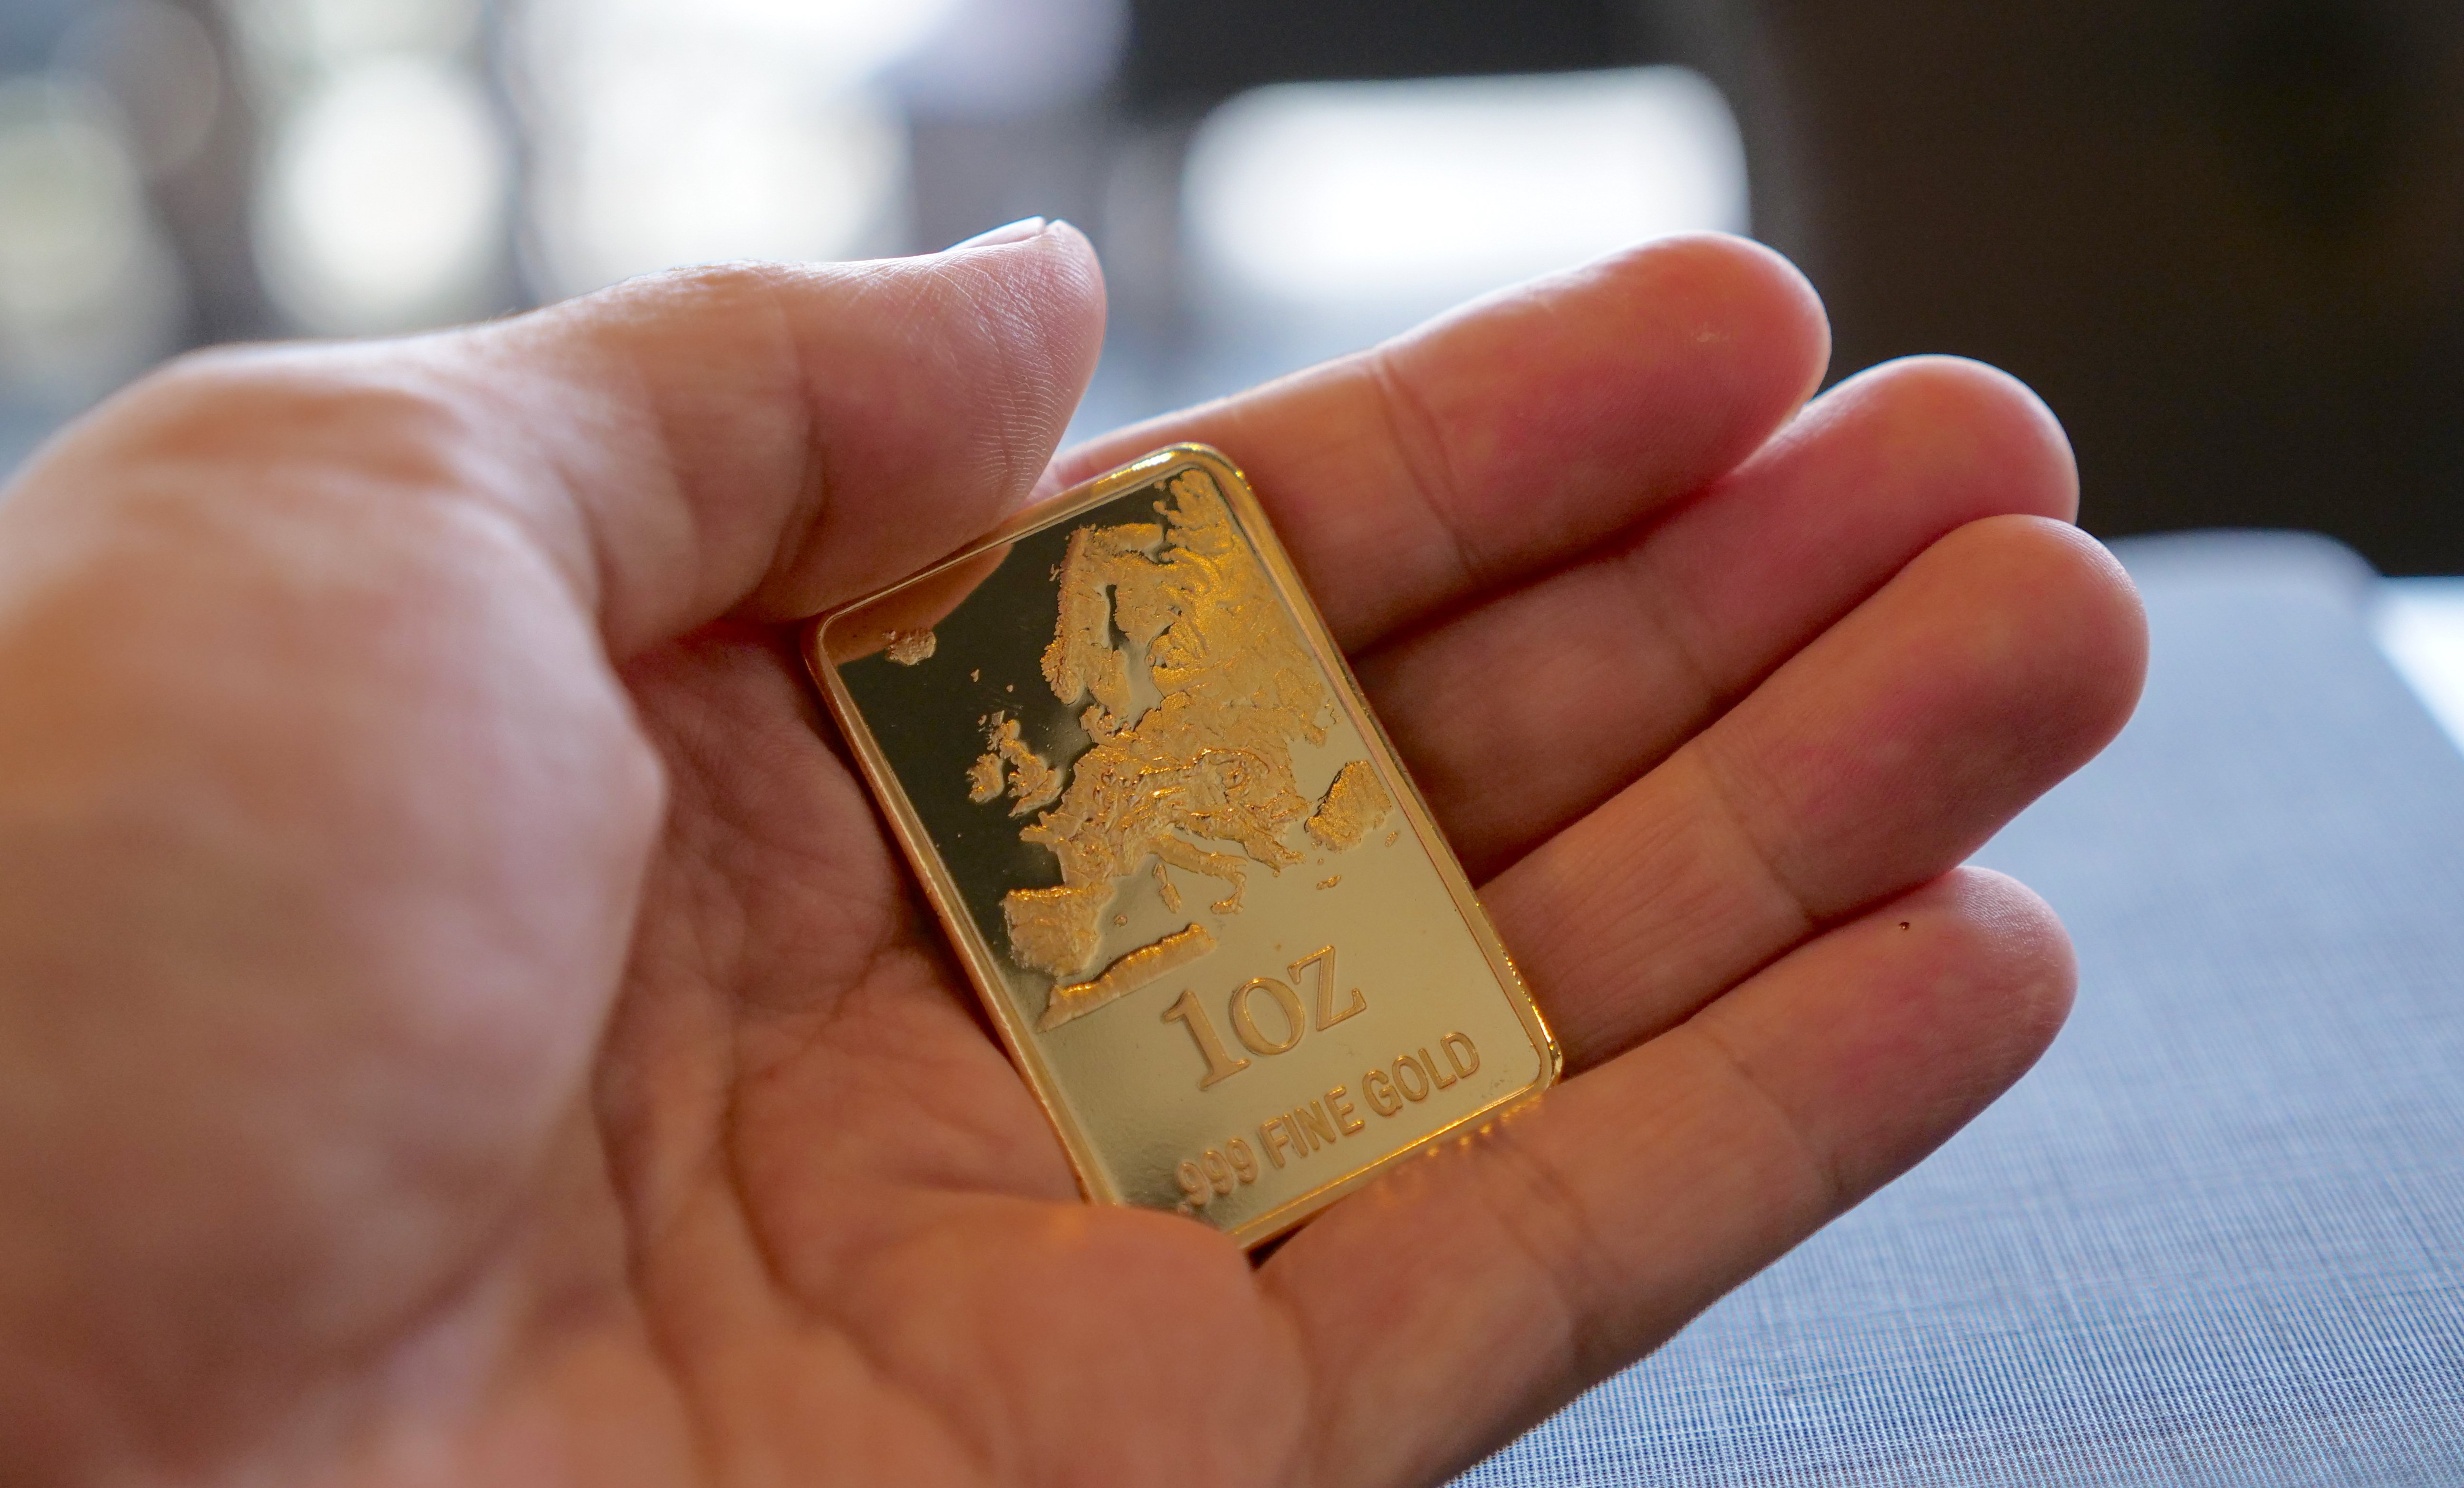 How to Buy Gold: 4 Ways to Invest - NerdWallet